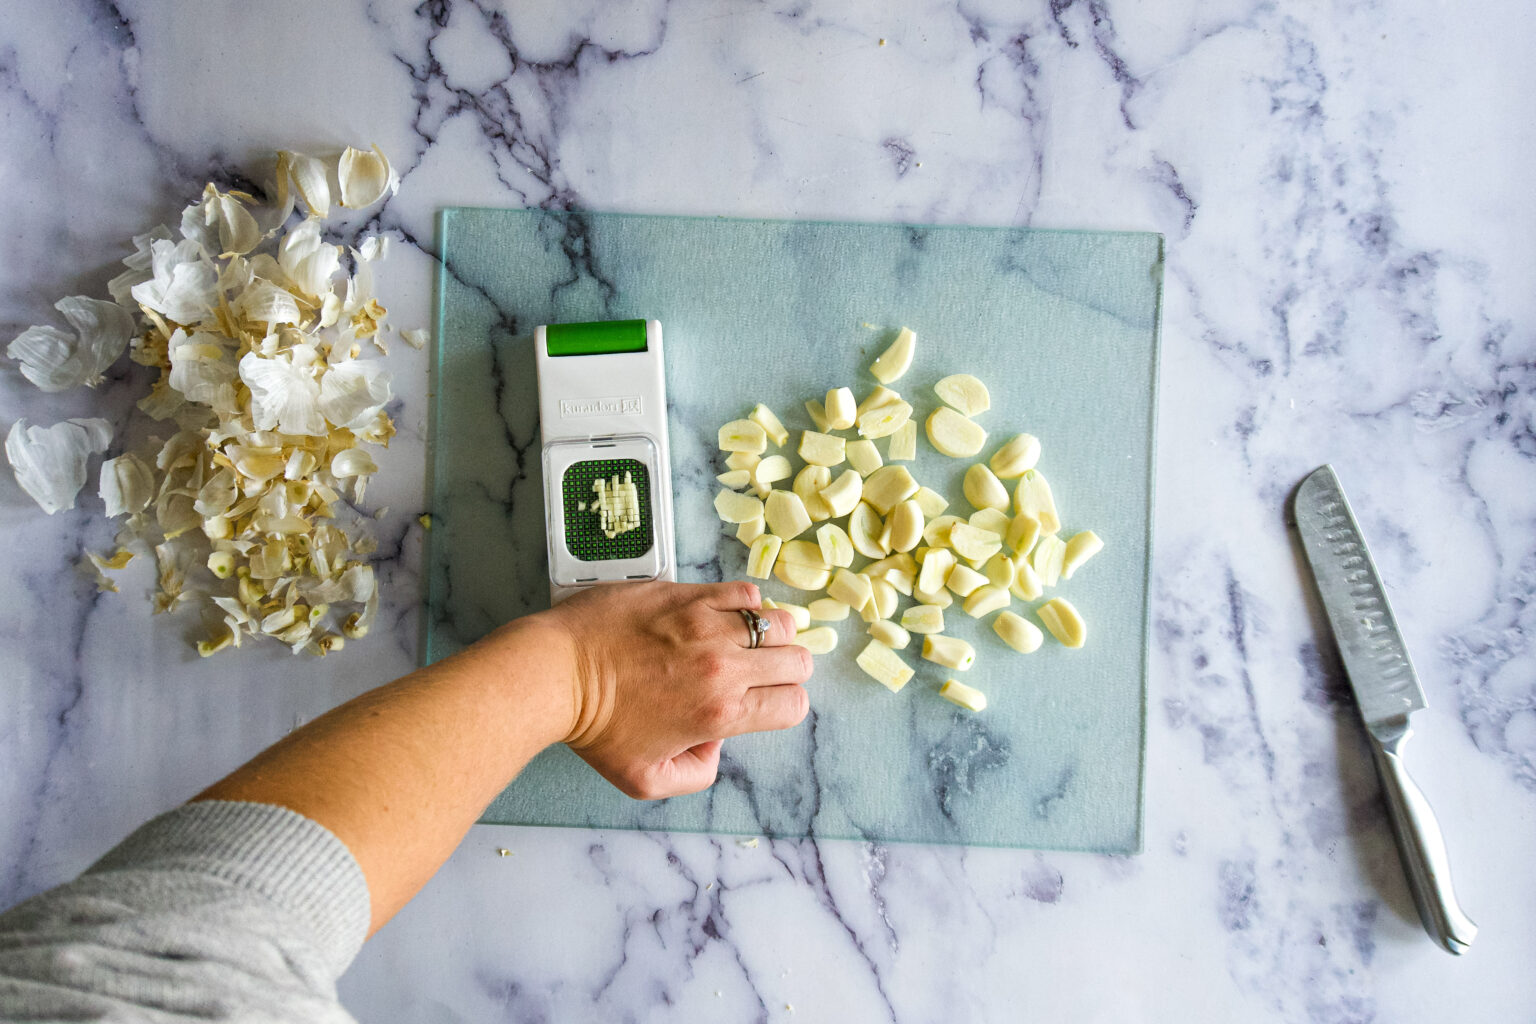 How To Dehydrate Garlic Without A Dehydrator